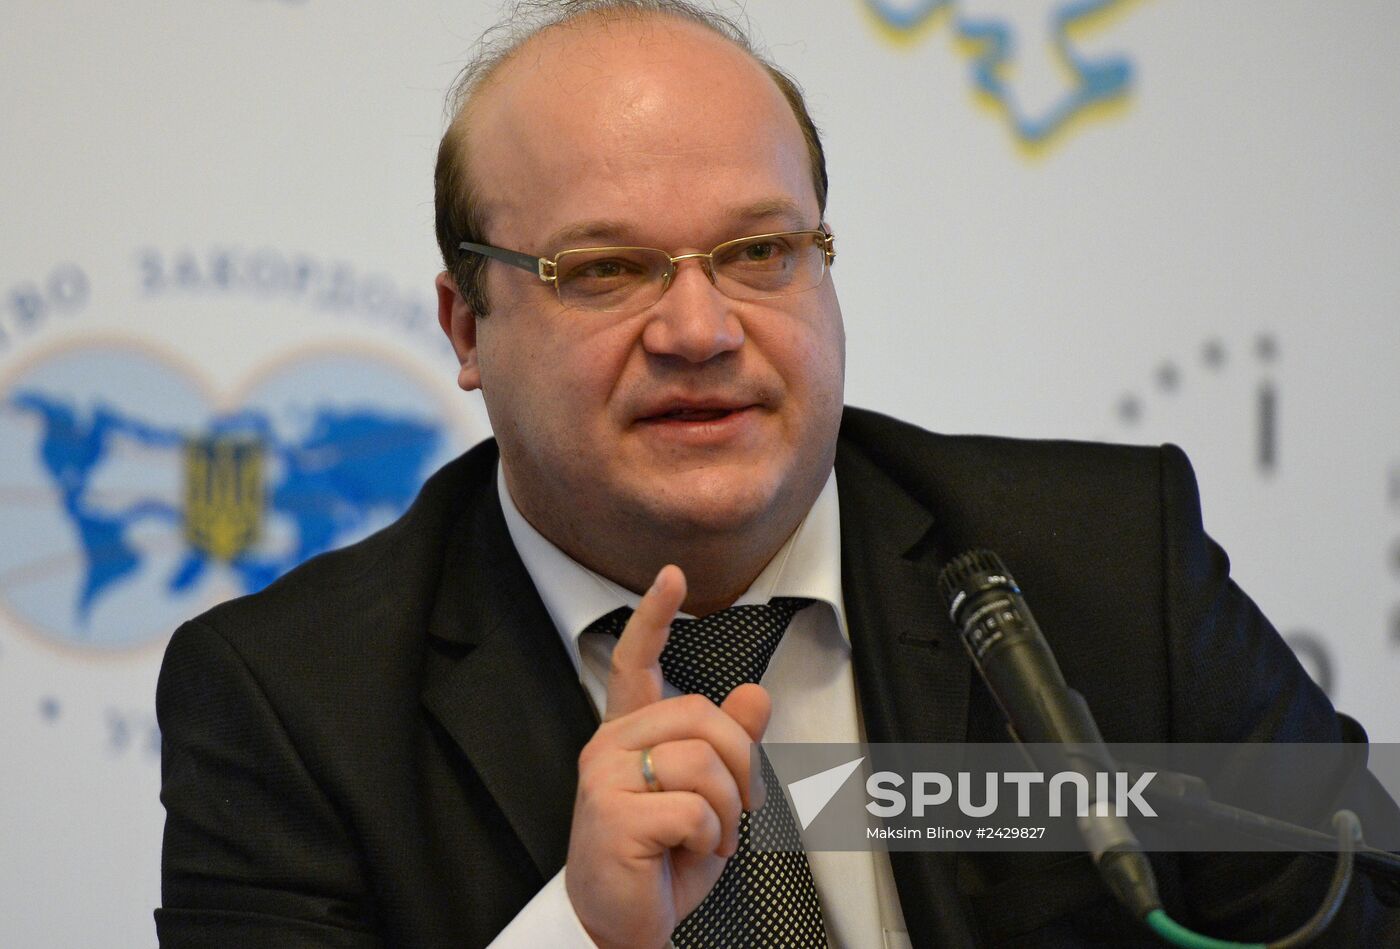 Conference on Ukraine-EU relations: New European Policy -- from Words to Actions"